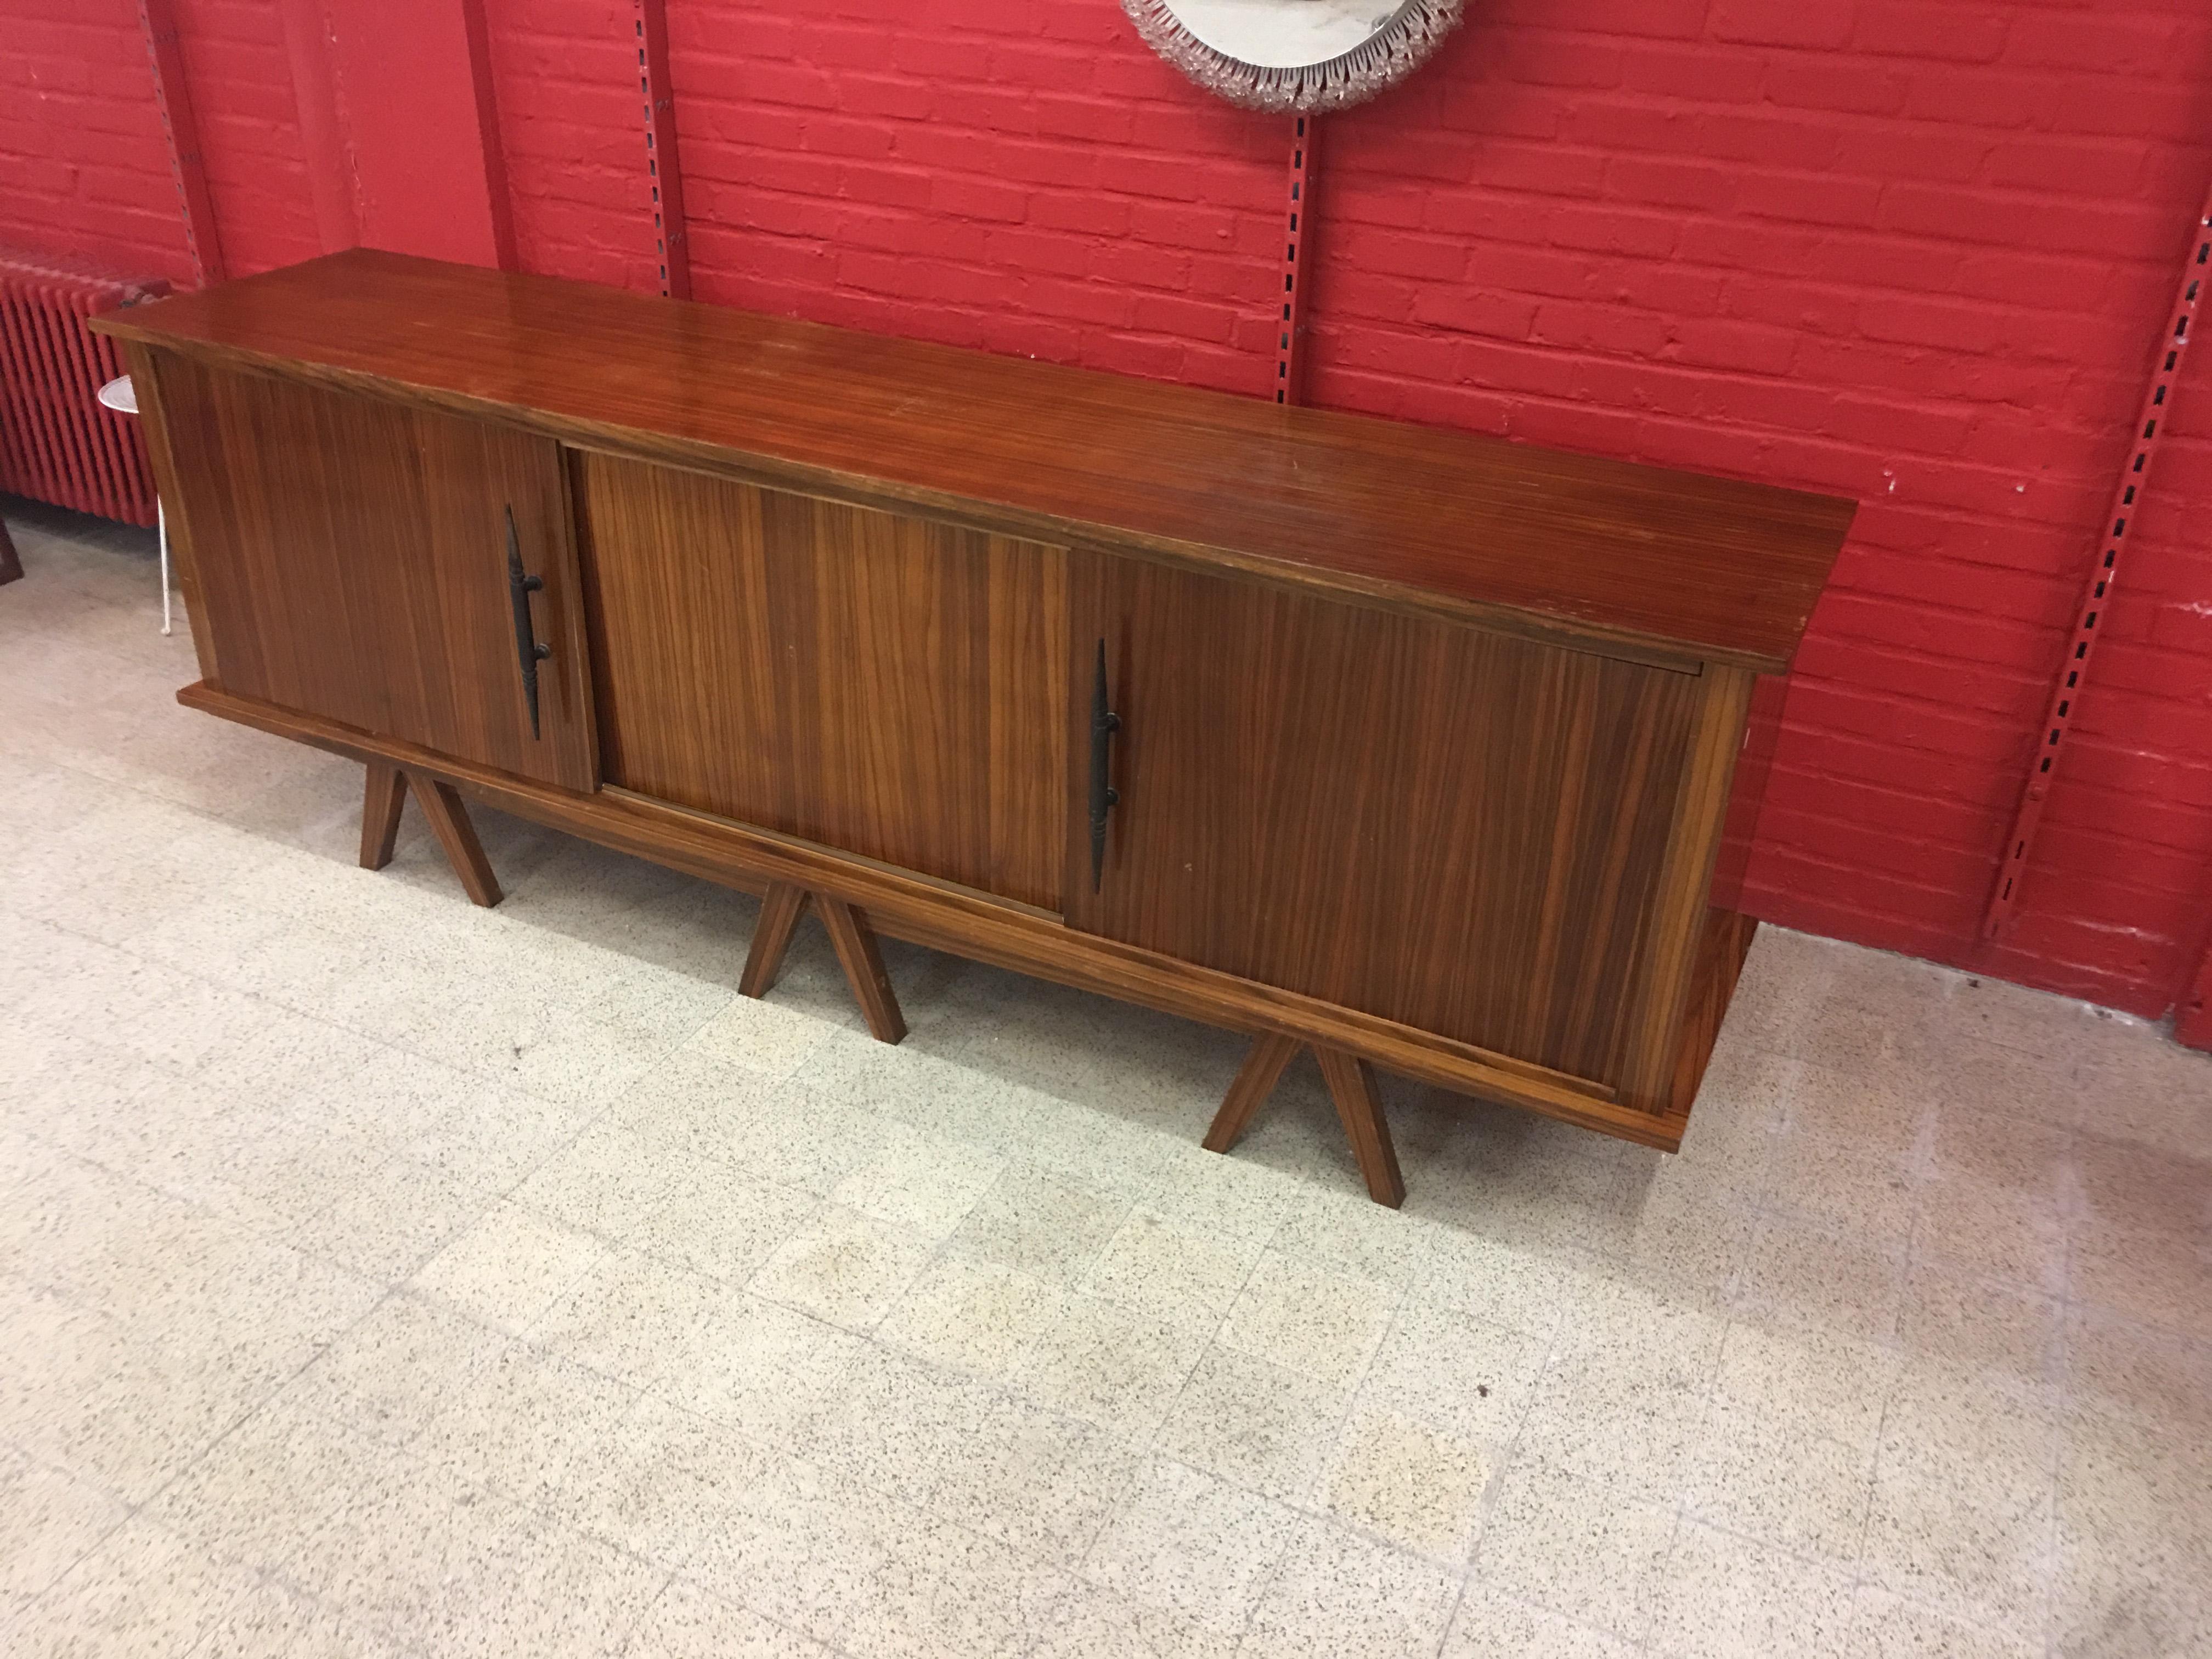  Zebra Wood and wrought iron brutalist Sideboard circa 1950 For Sale 1